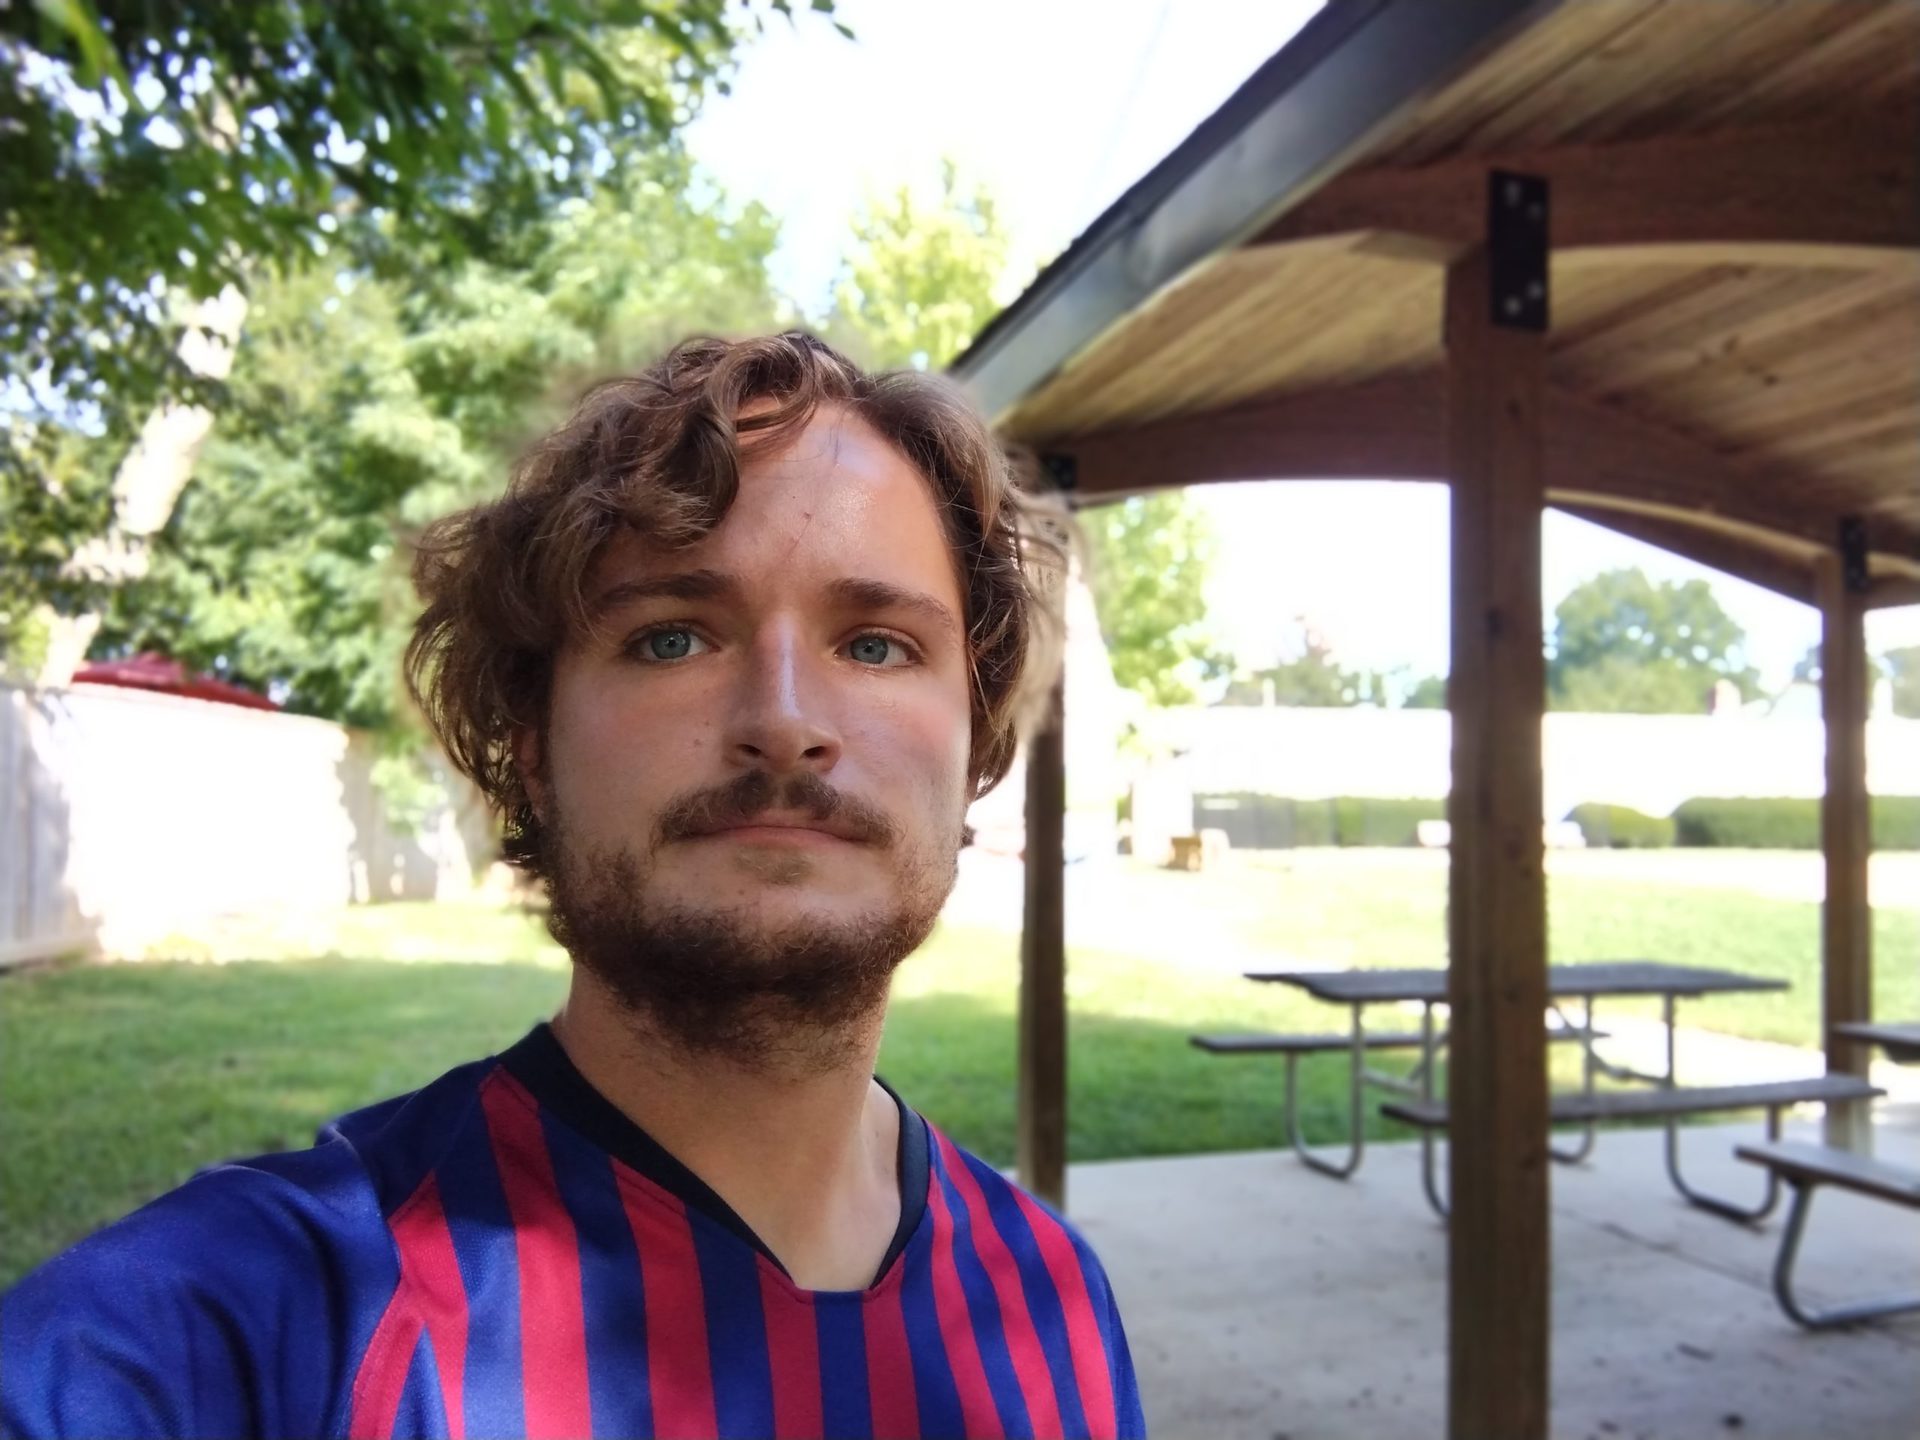 Motorola Moto G Power portrait selfie of a man with light curly hair and facial hair wearing a blue and red striped top